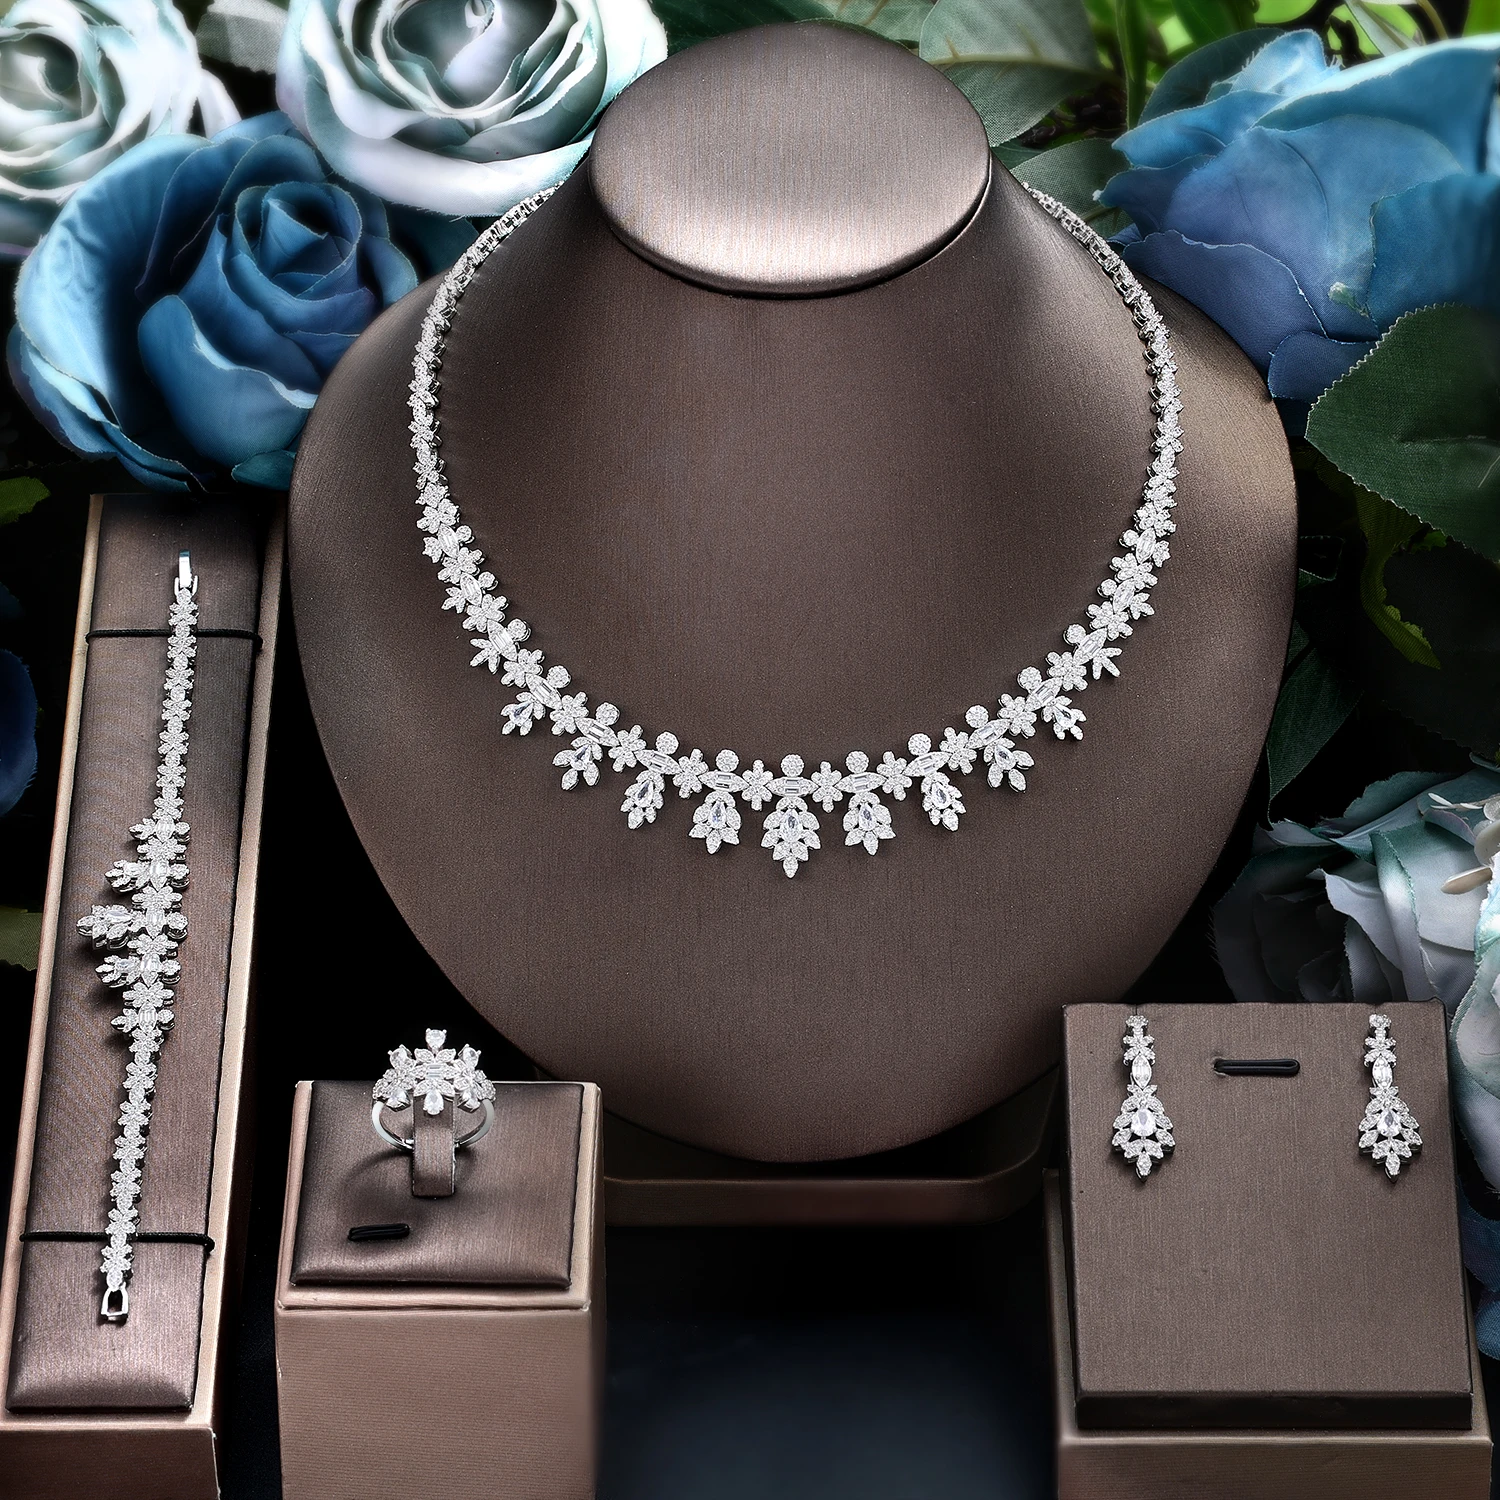 Hotsale African Blue Bridal Jewelry Sets New Fashion Dubai Necklace Sets For Women Wedding Party Accessories-animated-img